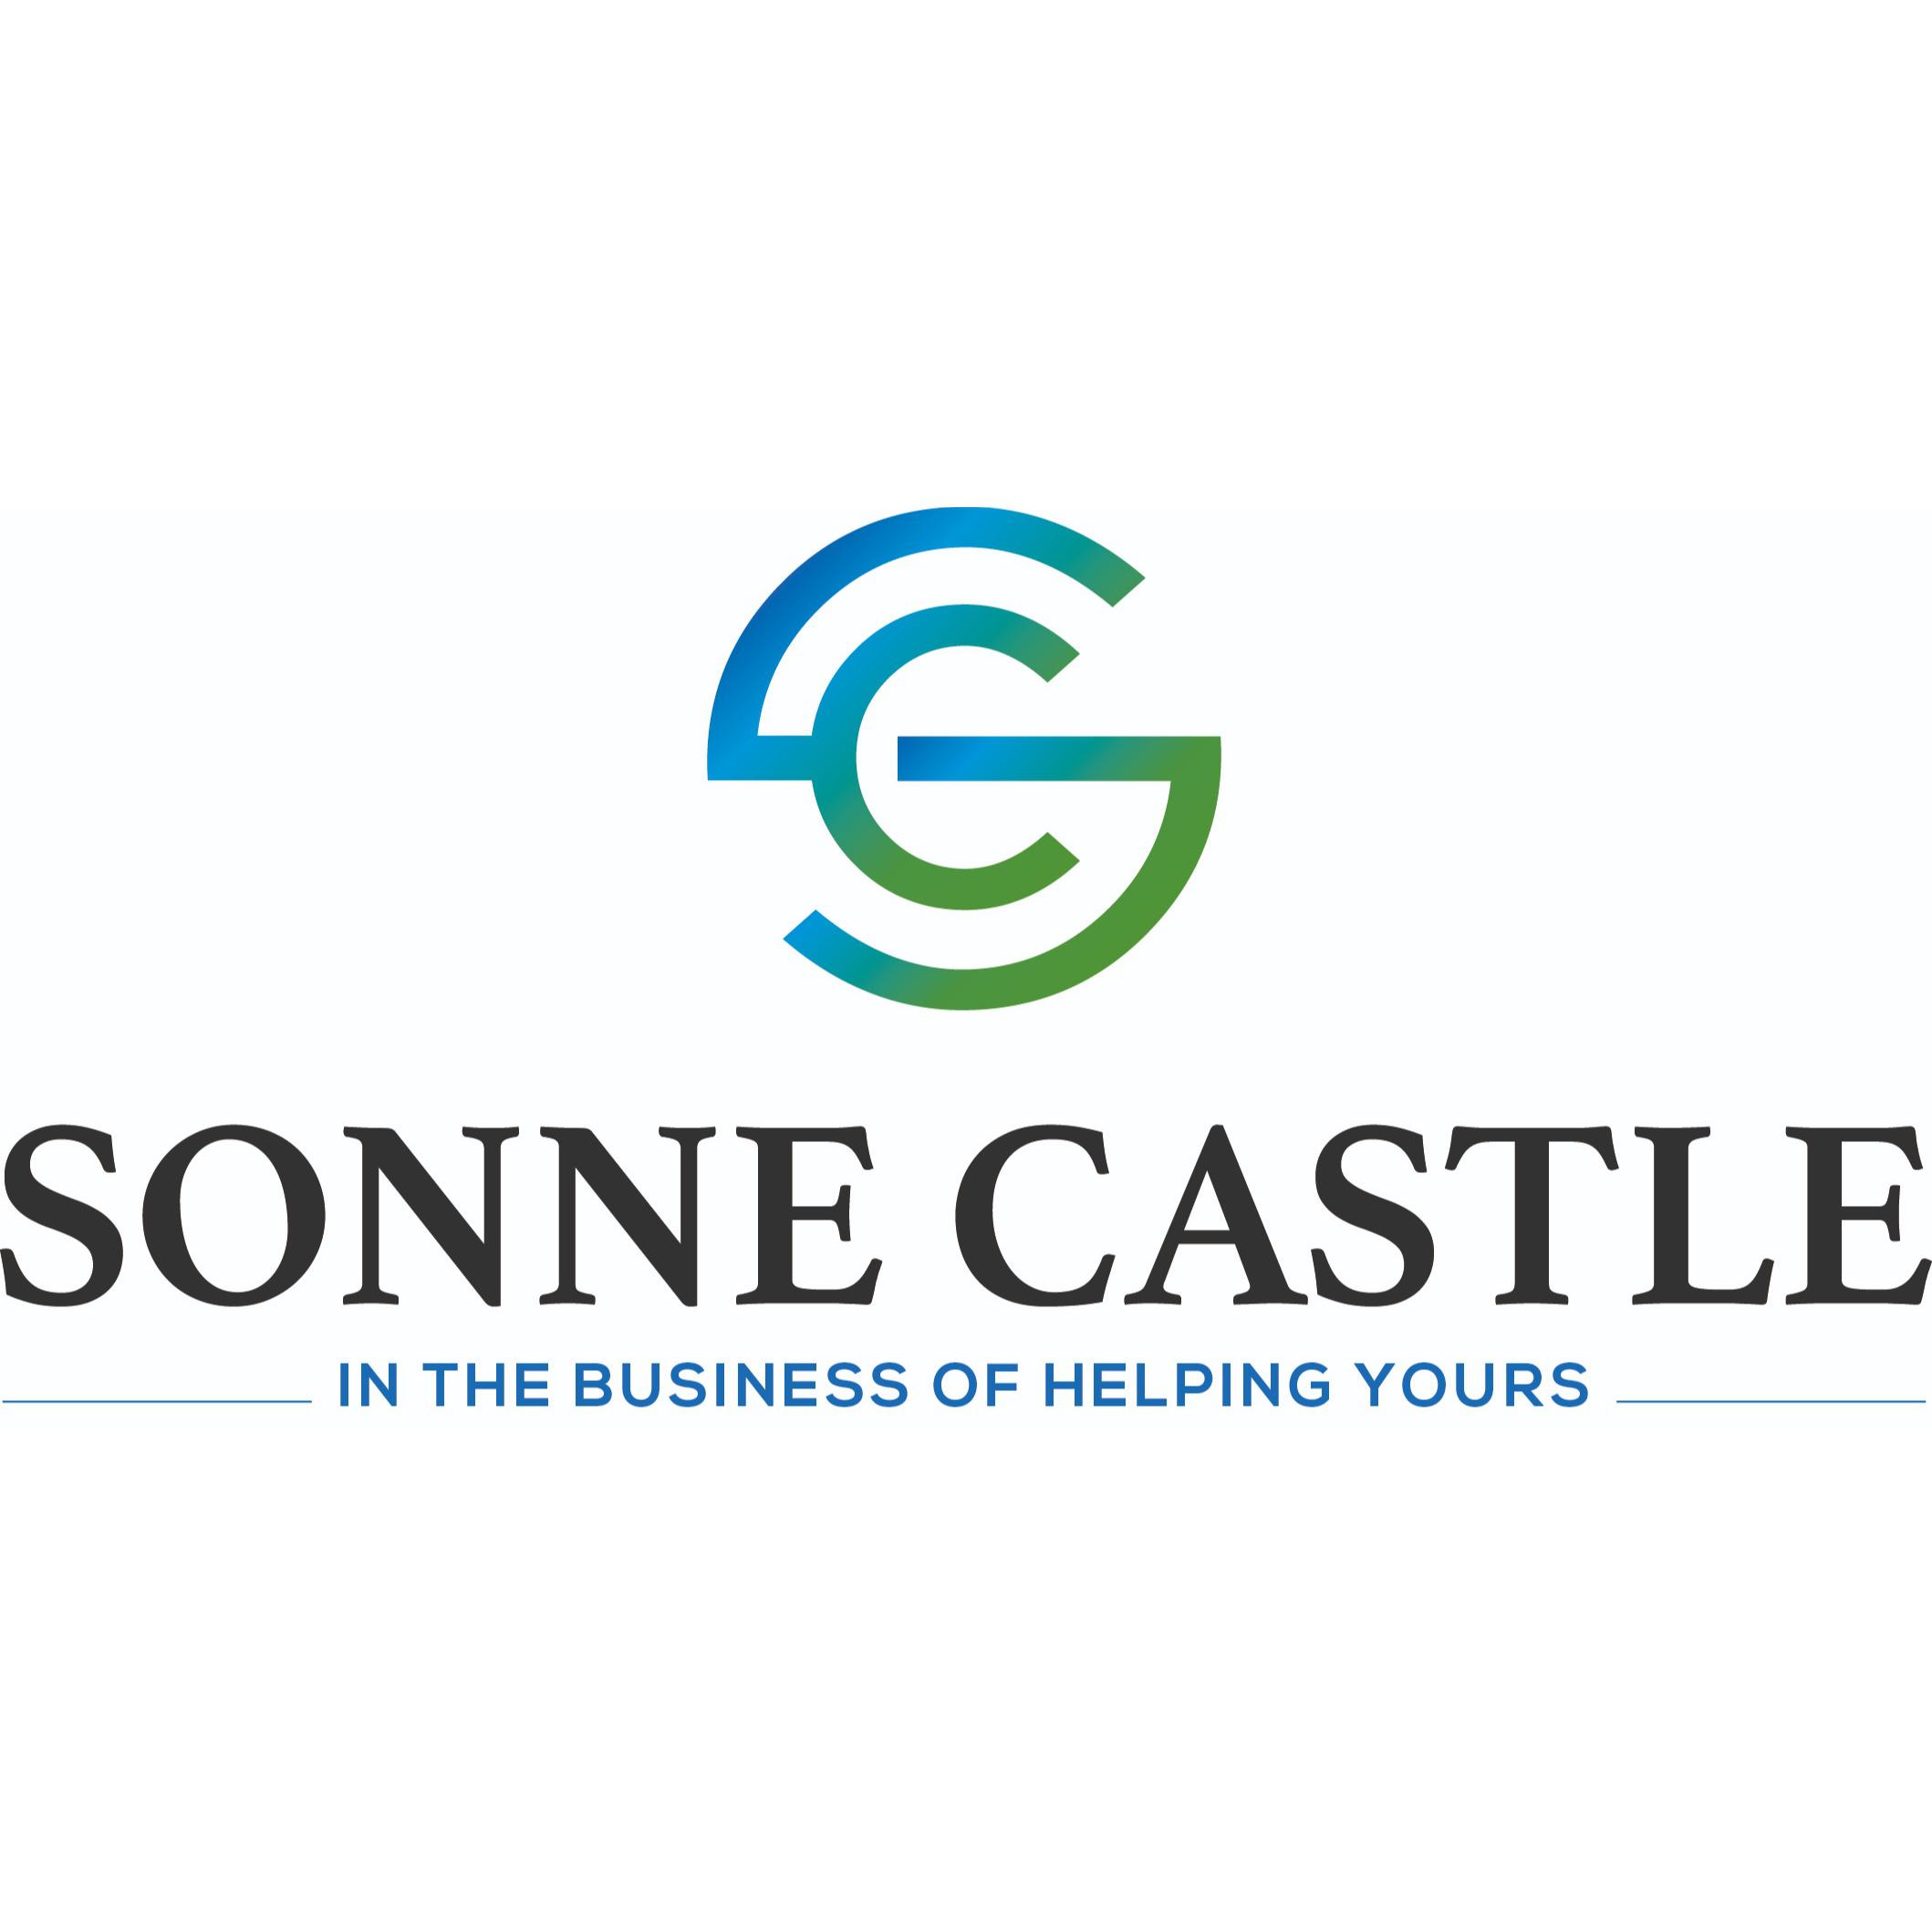 S

SONNE CASTLE

IN THE BUSINESS OF HELPING YOURS